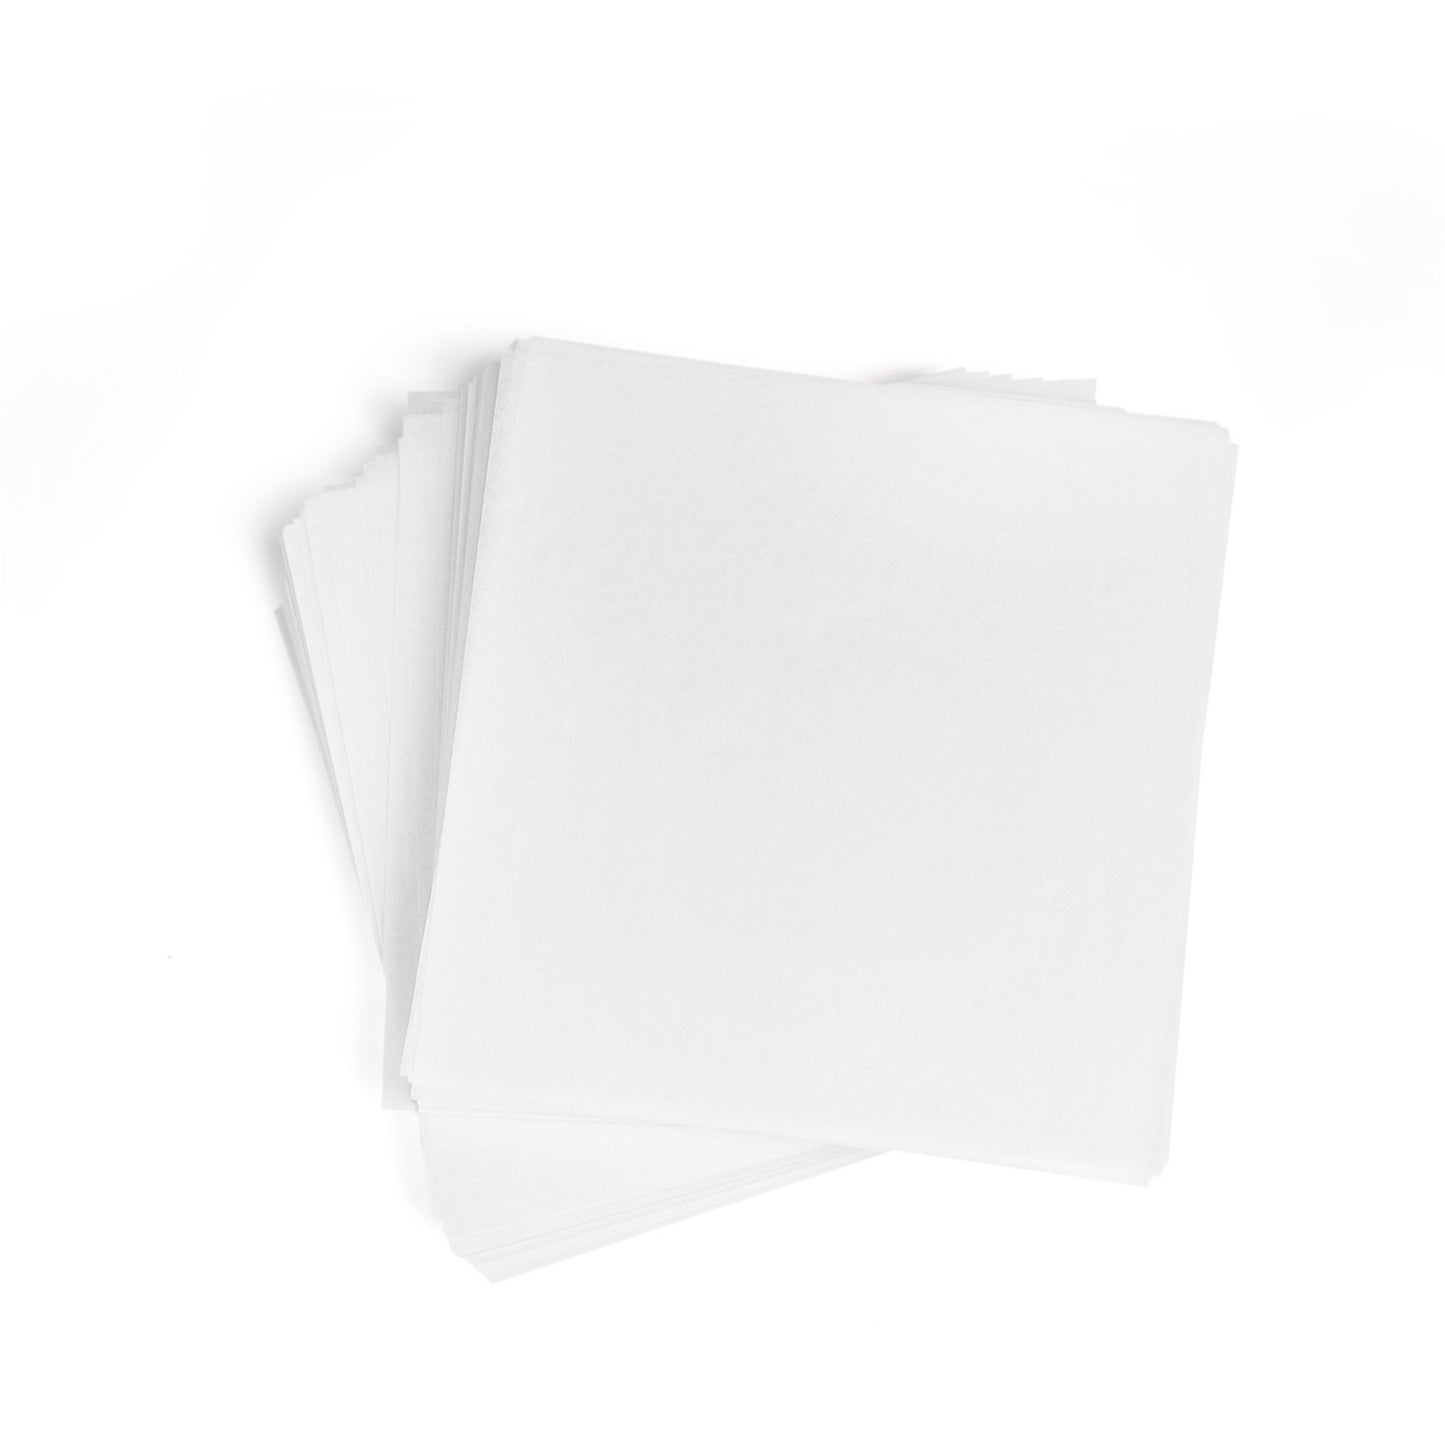 4" X 4" PARCHMENT PAPER SHEETS - SILICONE COATED - 1,000 COUNT Flower Power Packages 